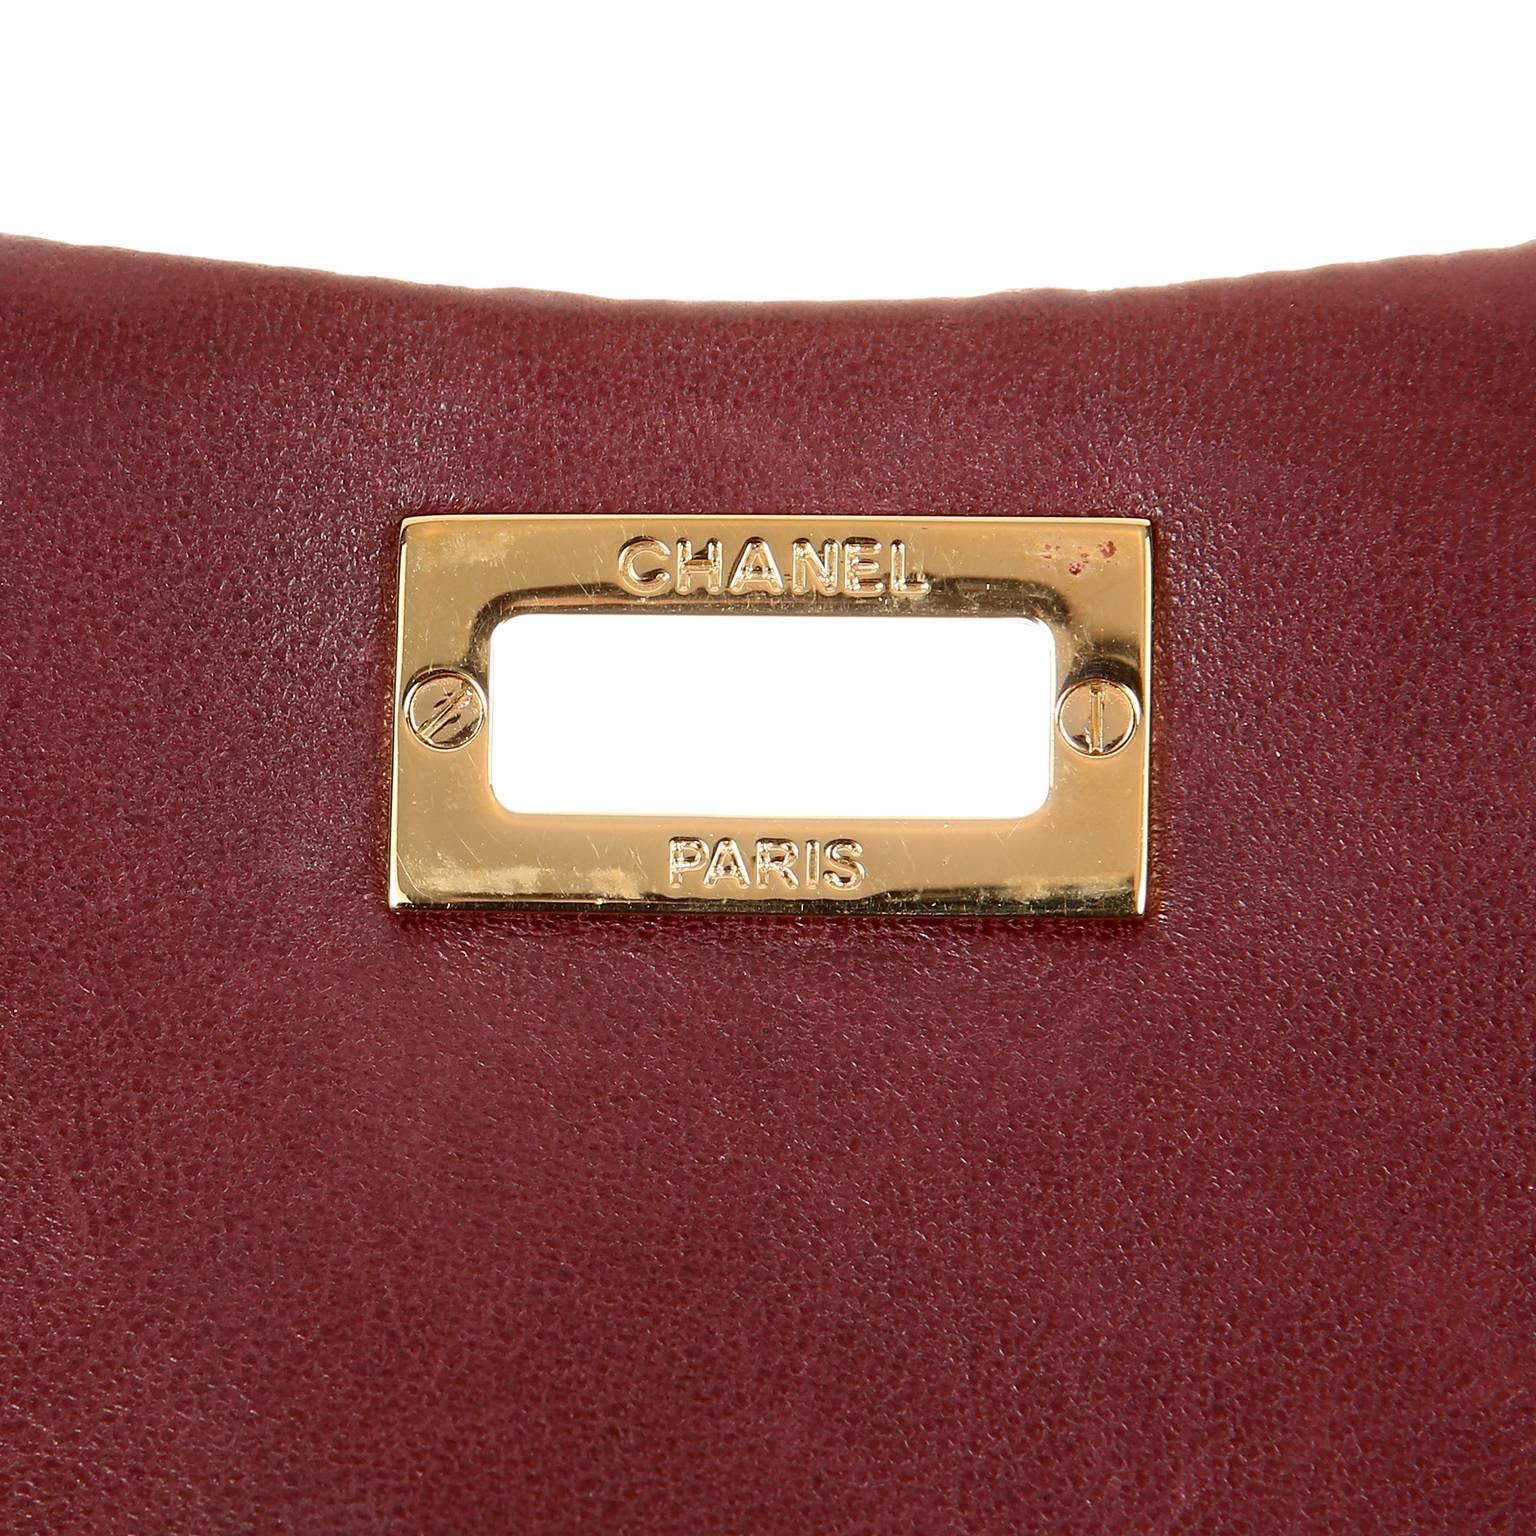 Chanel Burgundy Leather  Accordion Flap Bag For Sale 3